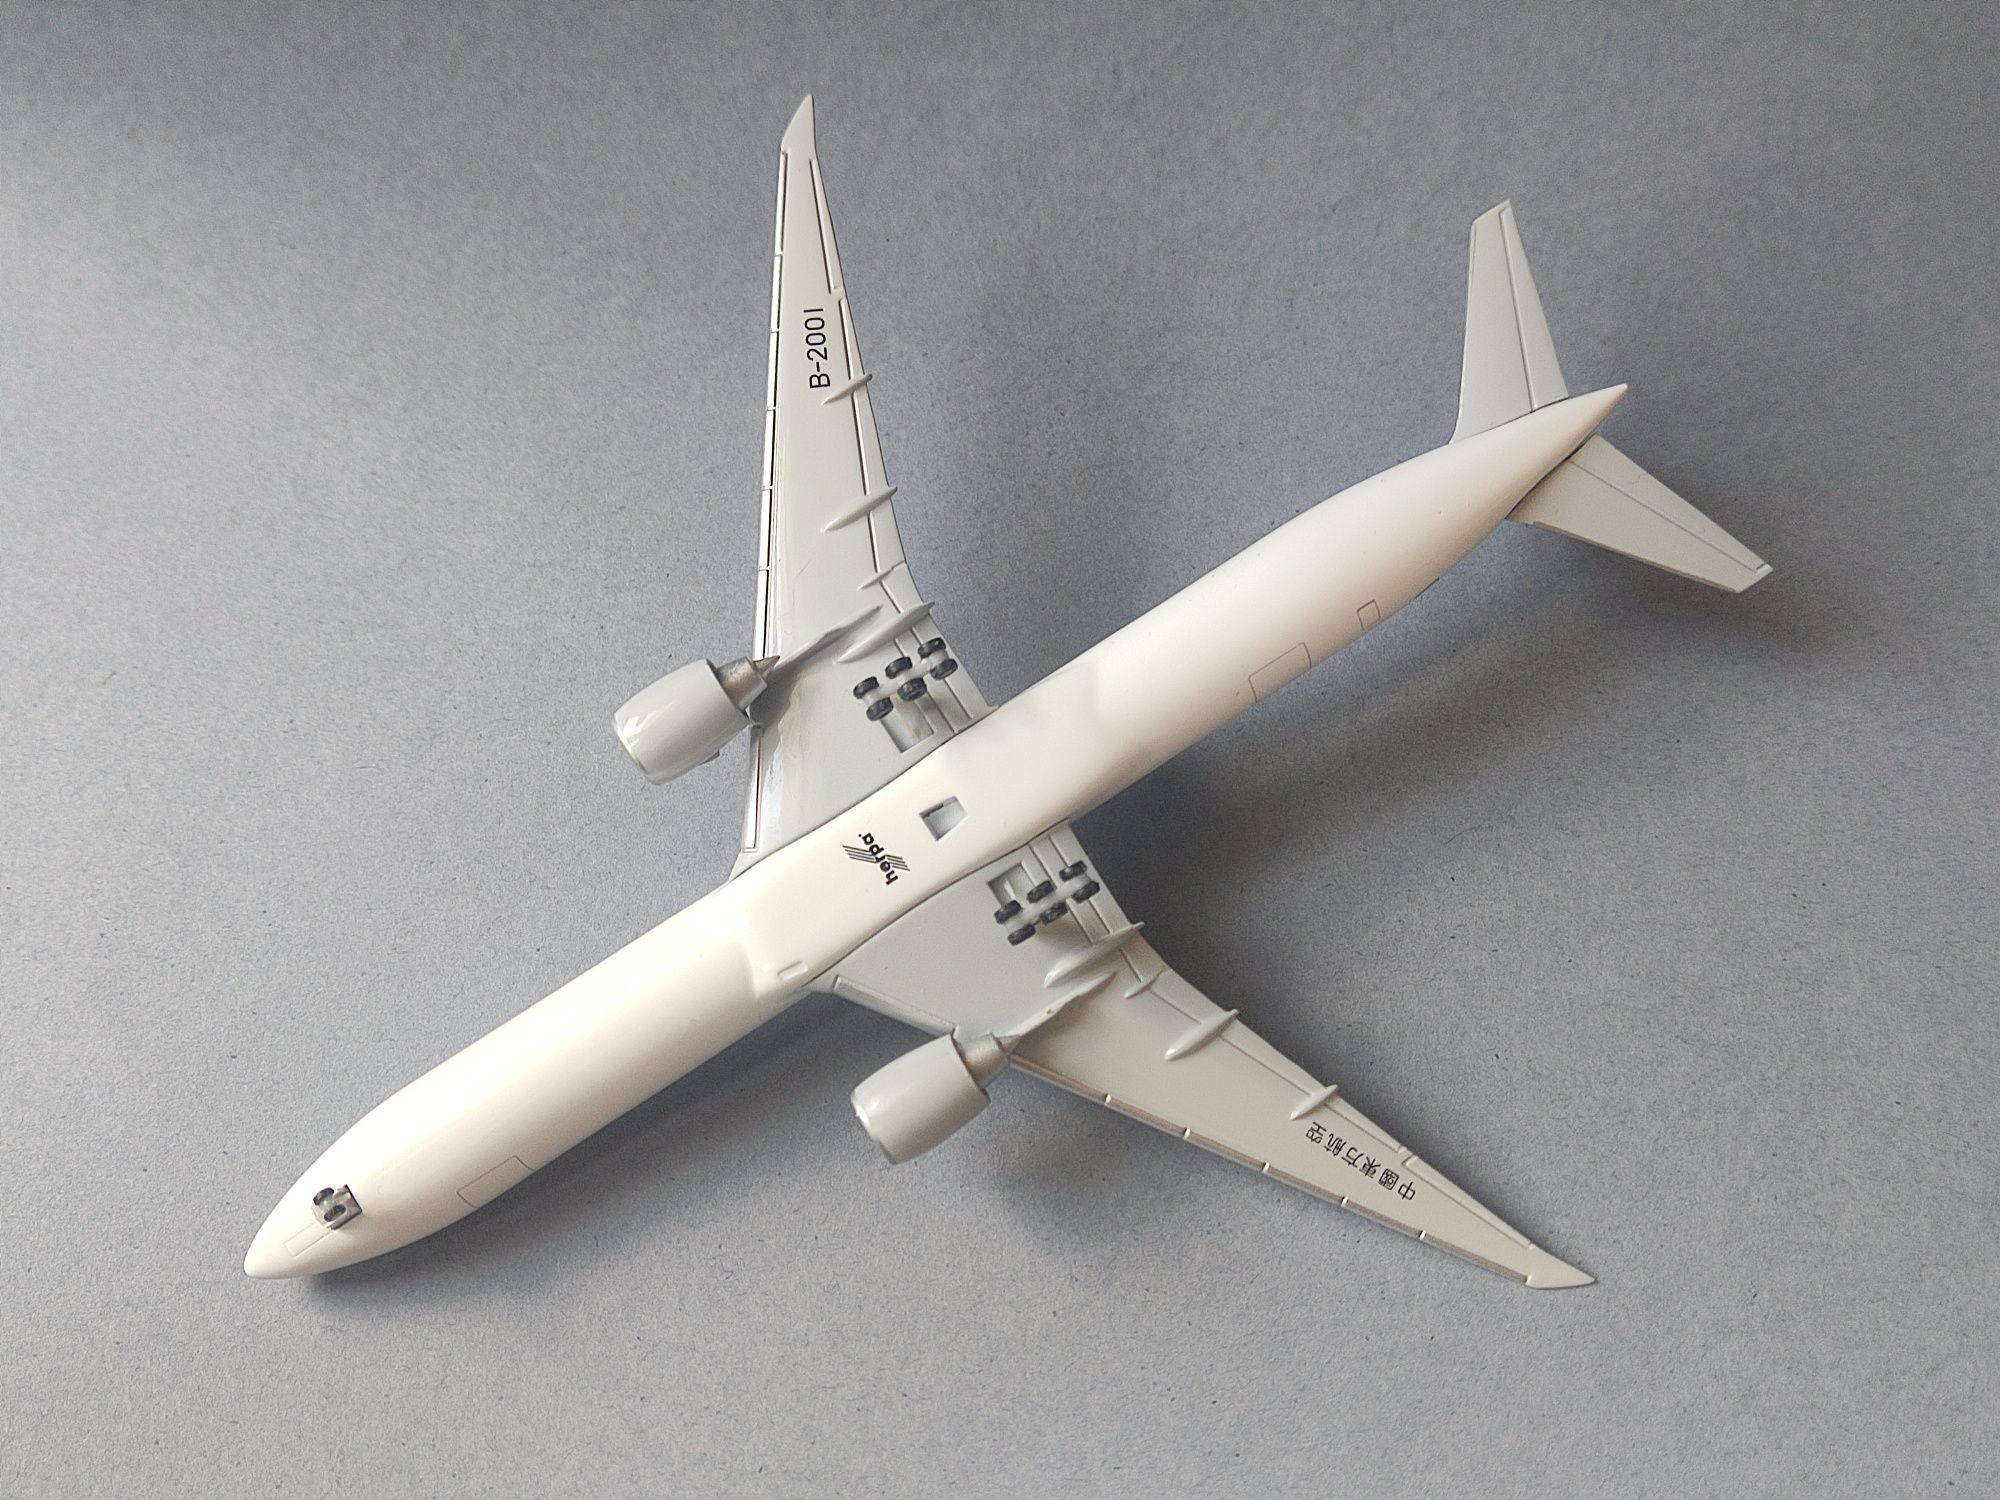 Herpa Boeing 777-300er China Easter Airlines